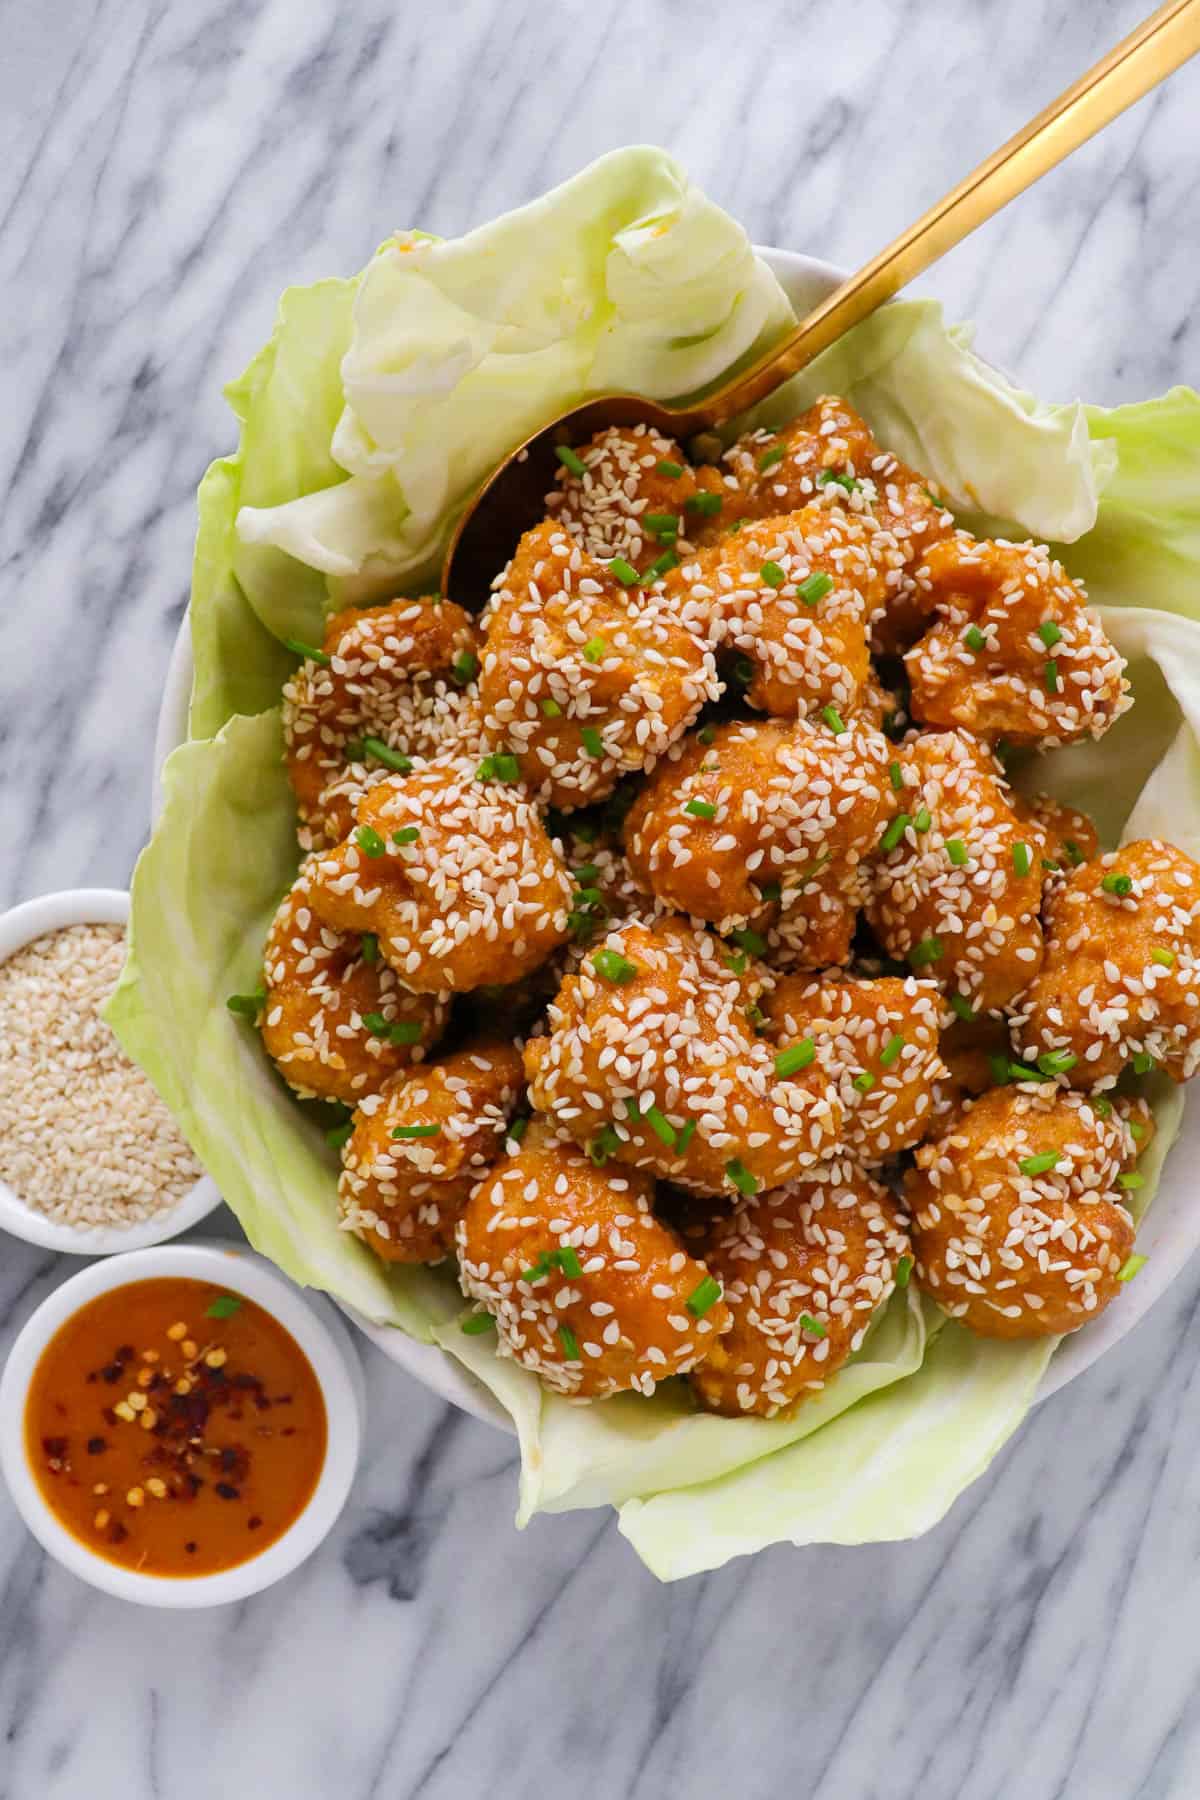 Orange sesame cauliflower in a bowl with sesame seeds + extra sauce on the side.